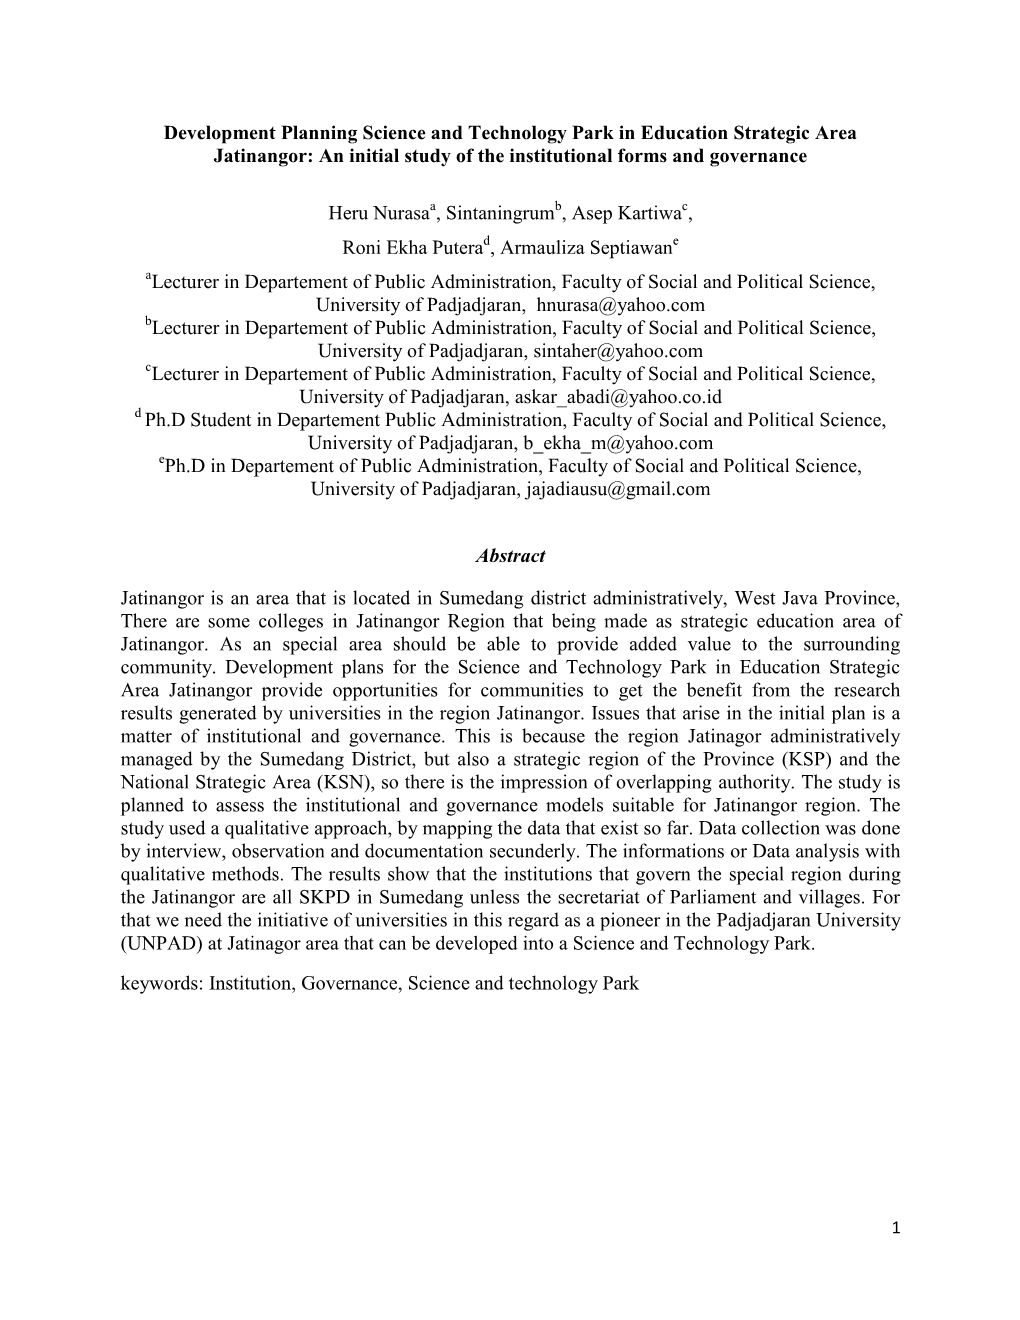 Development Planning Science and Technology Park in Education Strategic Area Jatinangor: an Initial Study of the Institutional Forms and Governance